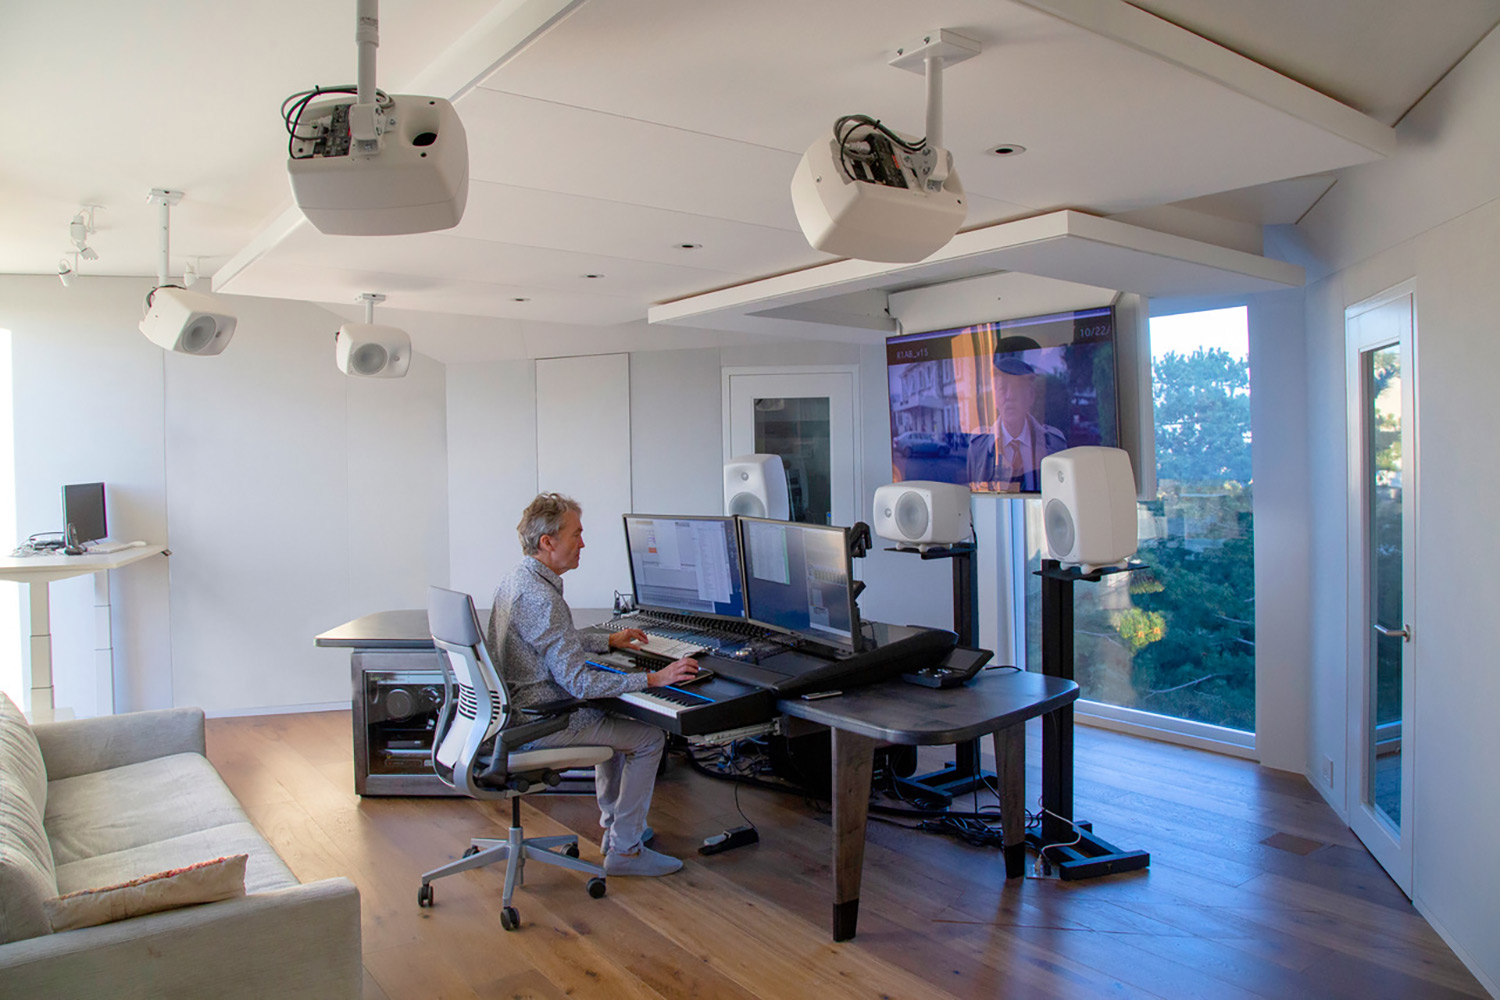 World-renown composer for films Carter Burwell returned to John Storyk and commissioned WSDG a new recording studio at his ultra modern Maziar Behrooz-designed home. Carter at his WSDG-designed studio working, side view.